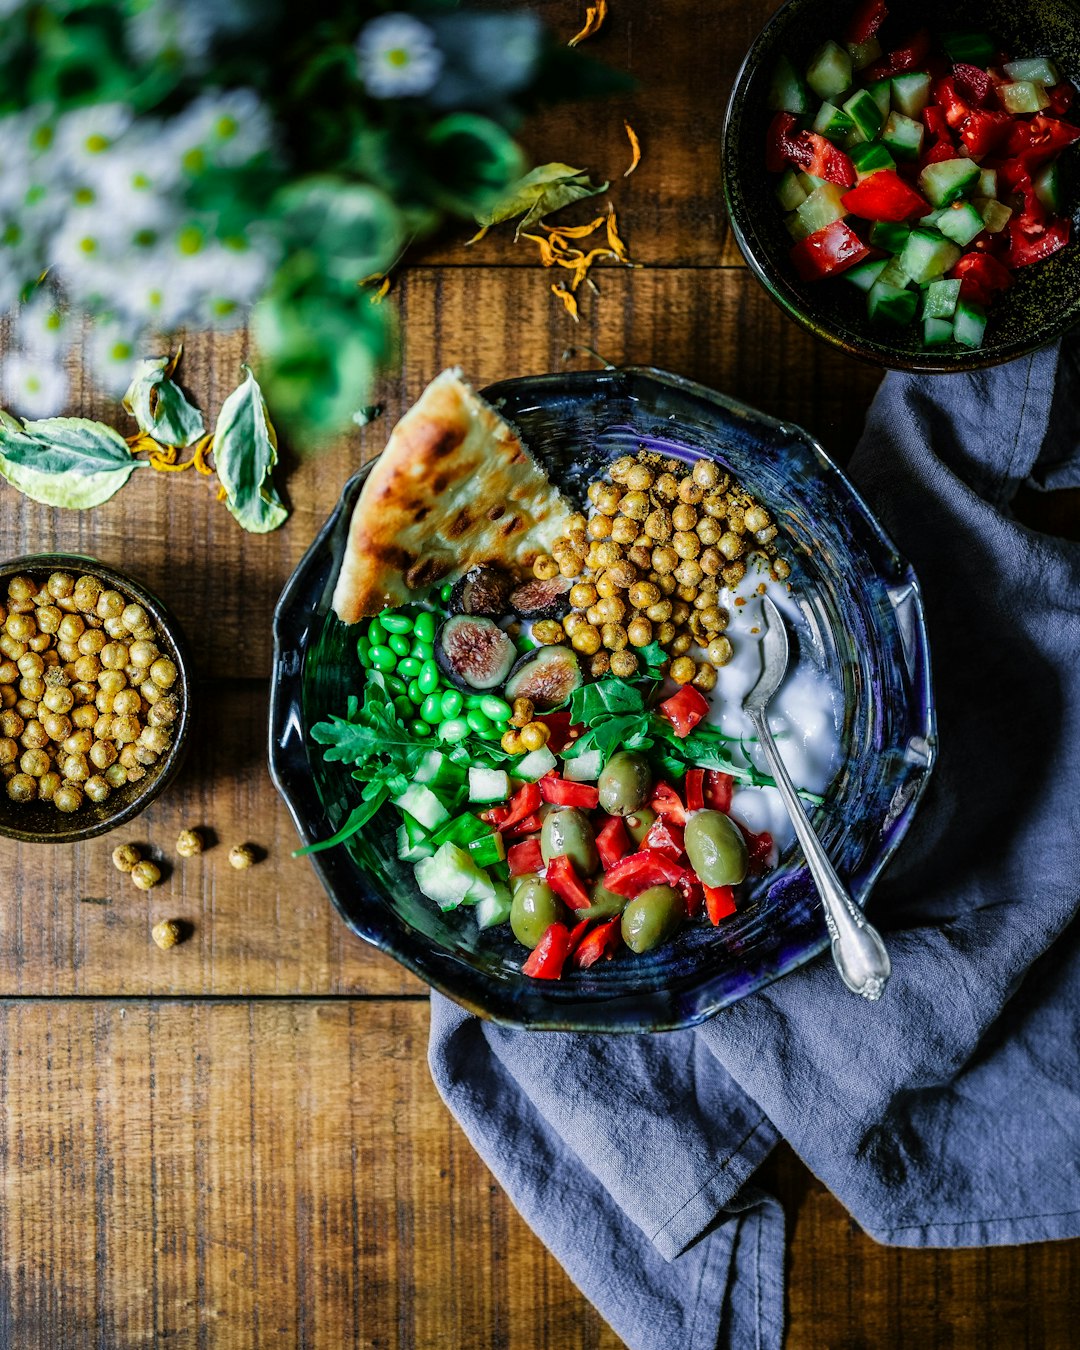 The Increasing Popularity and Benefits of Veganism